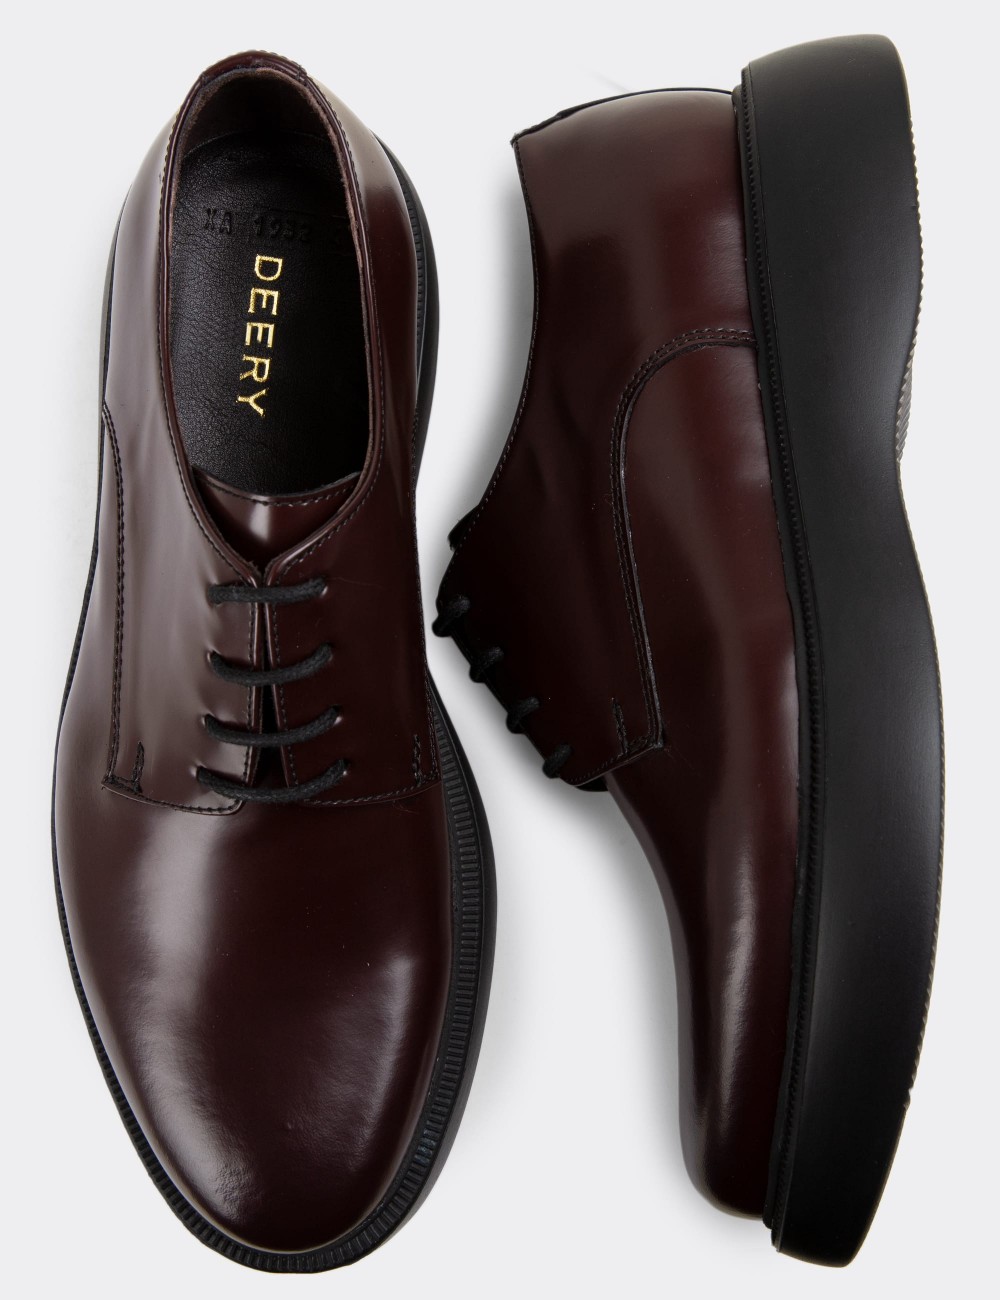 Deery Burgundy Patent Leather Lace-Up Shoes